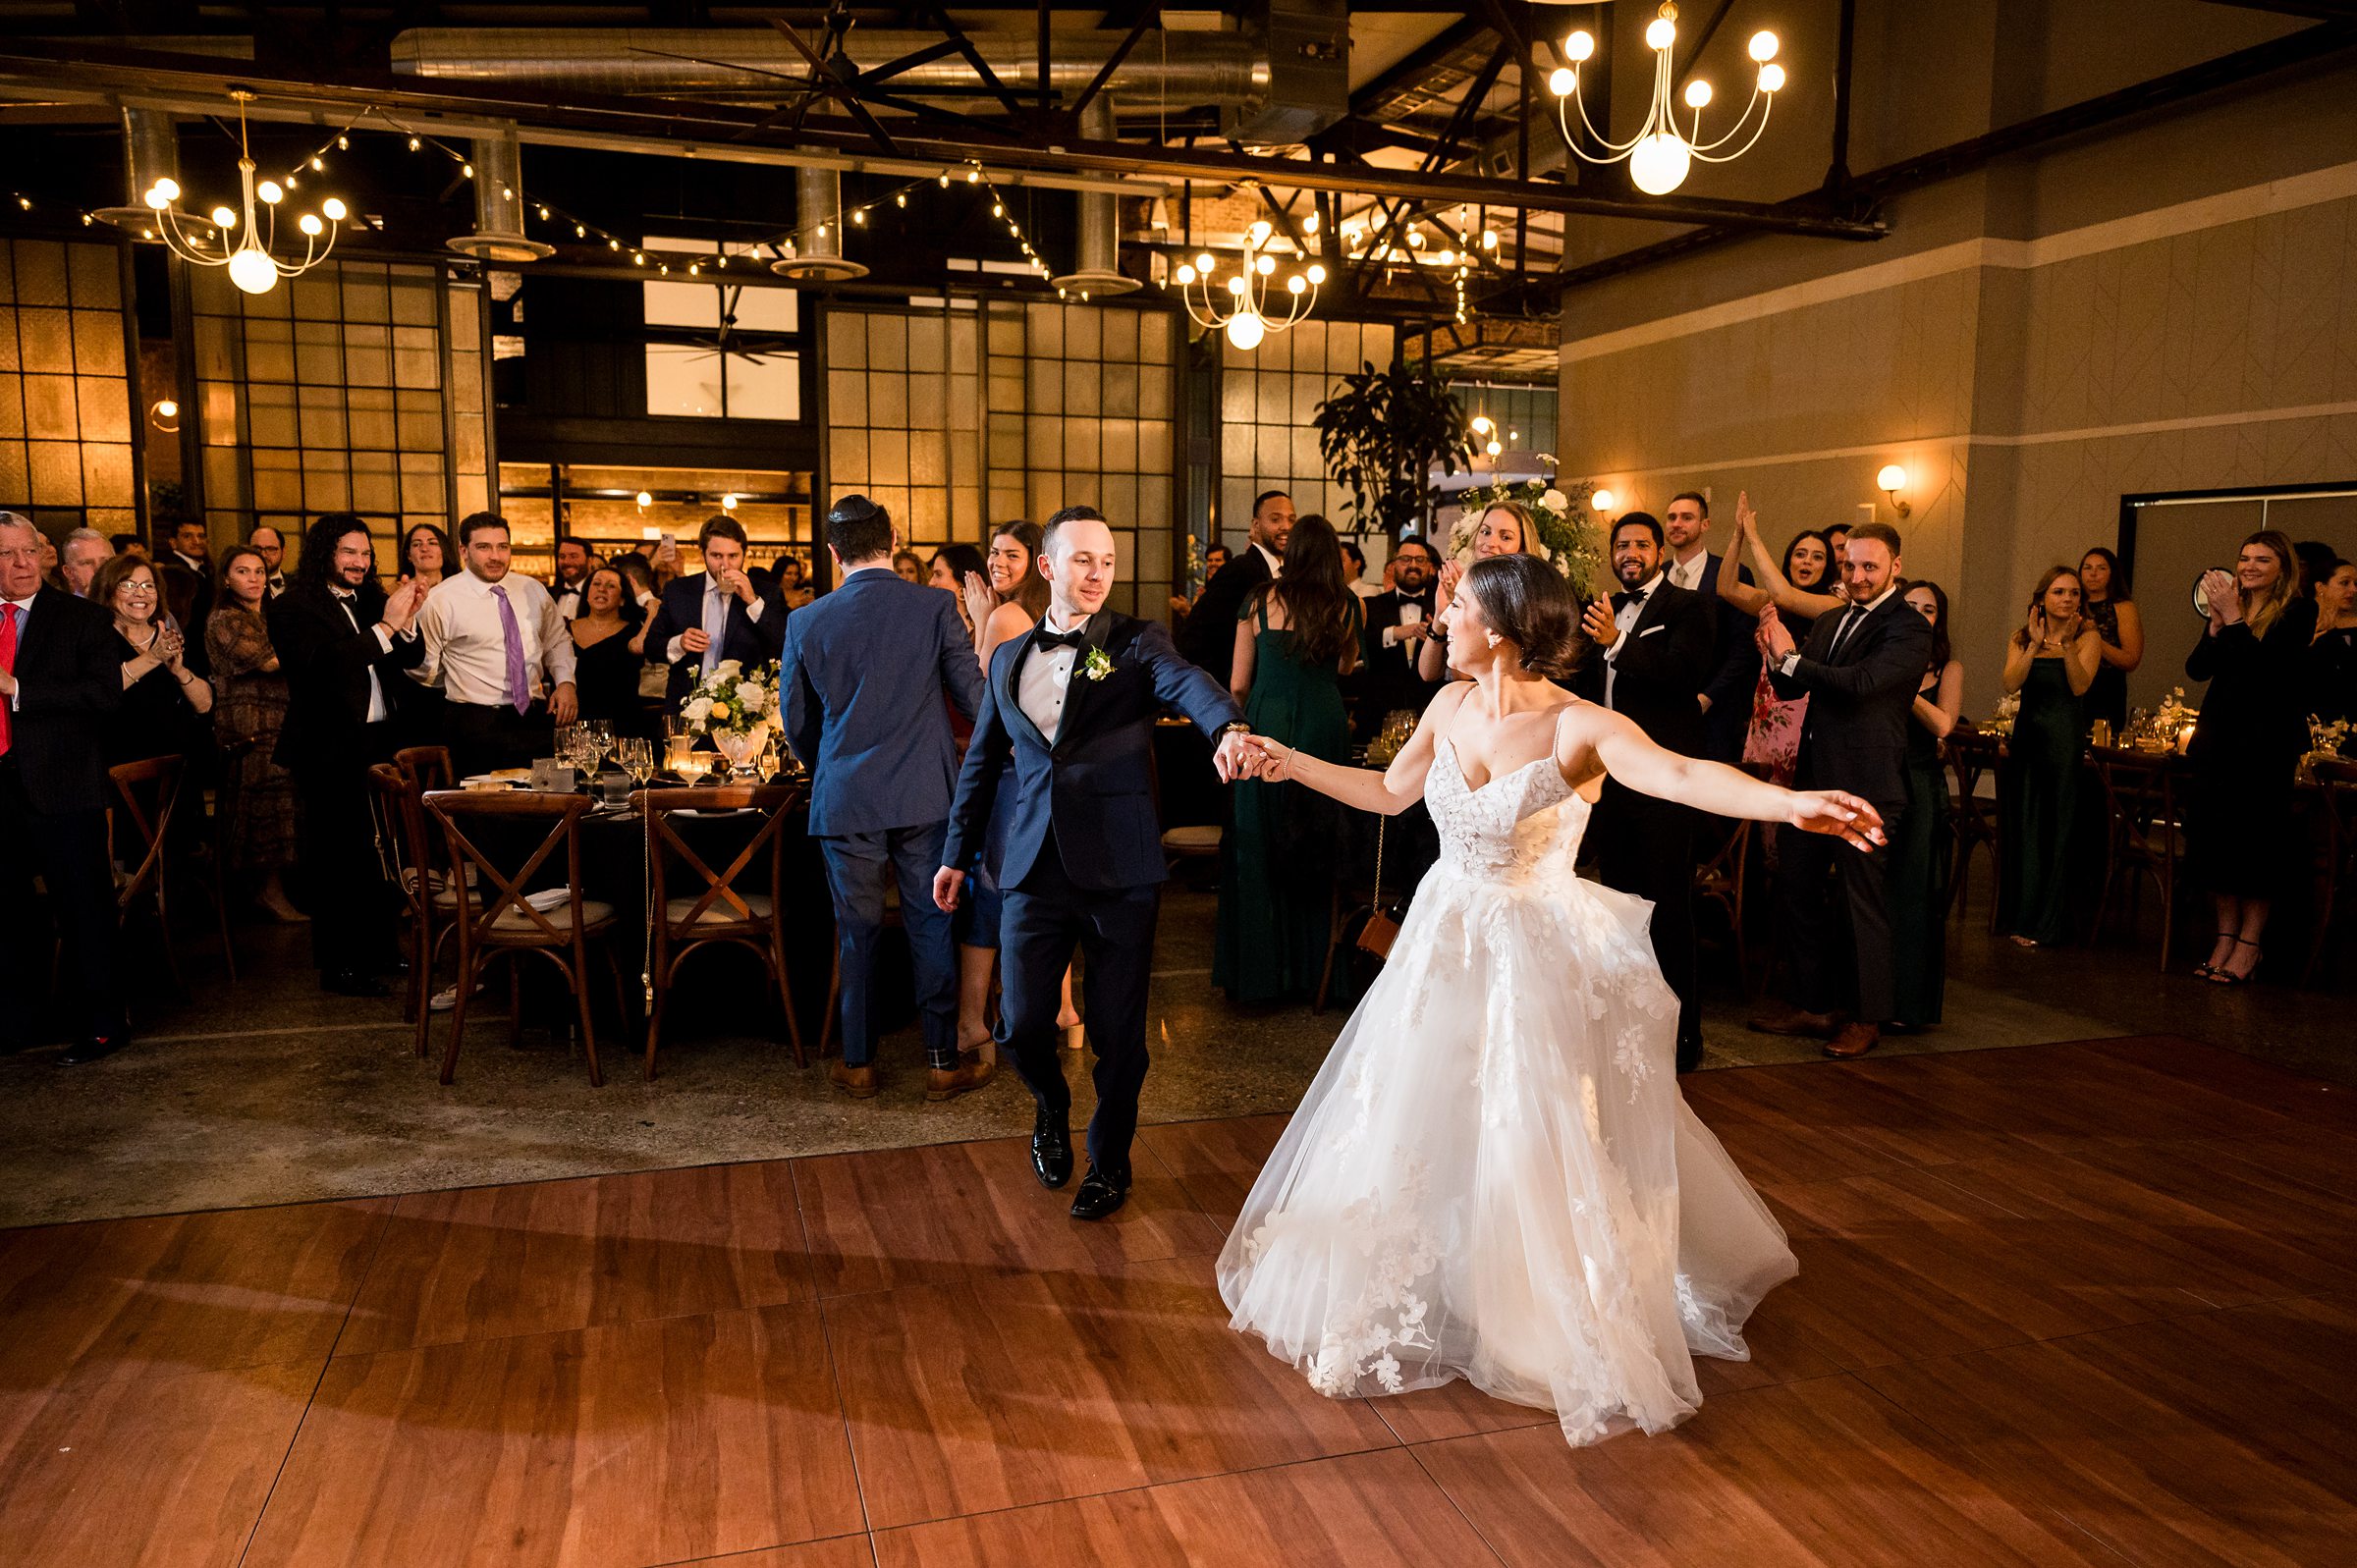 A bride and groom dancing on the dance floor at their Lilah Events wedding reception.